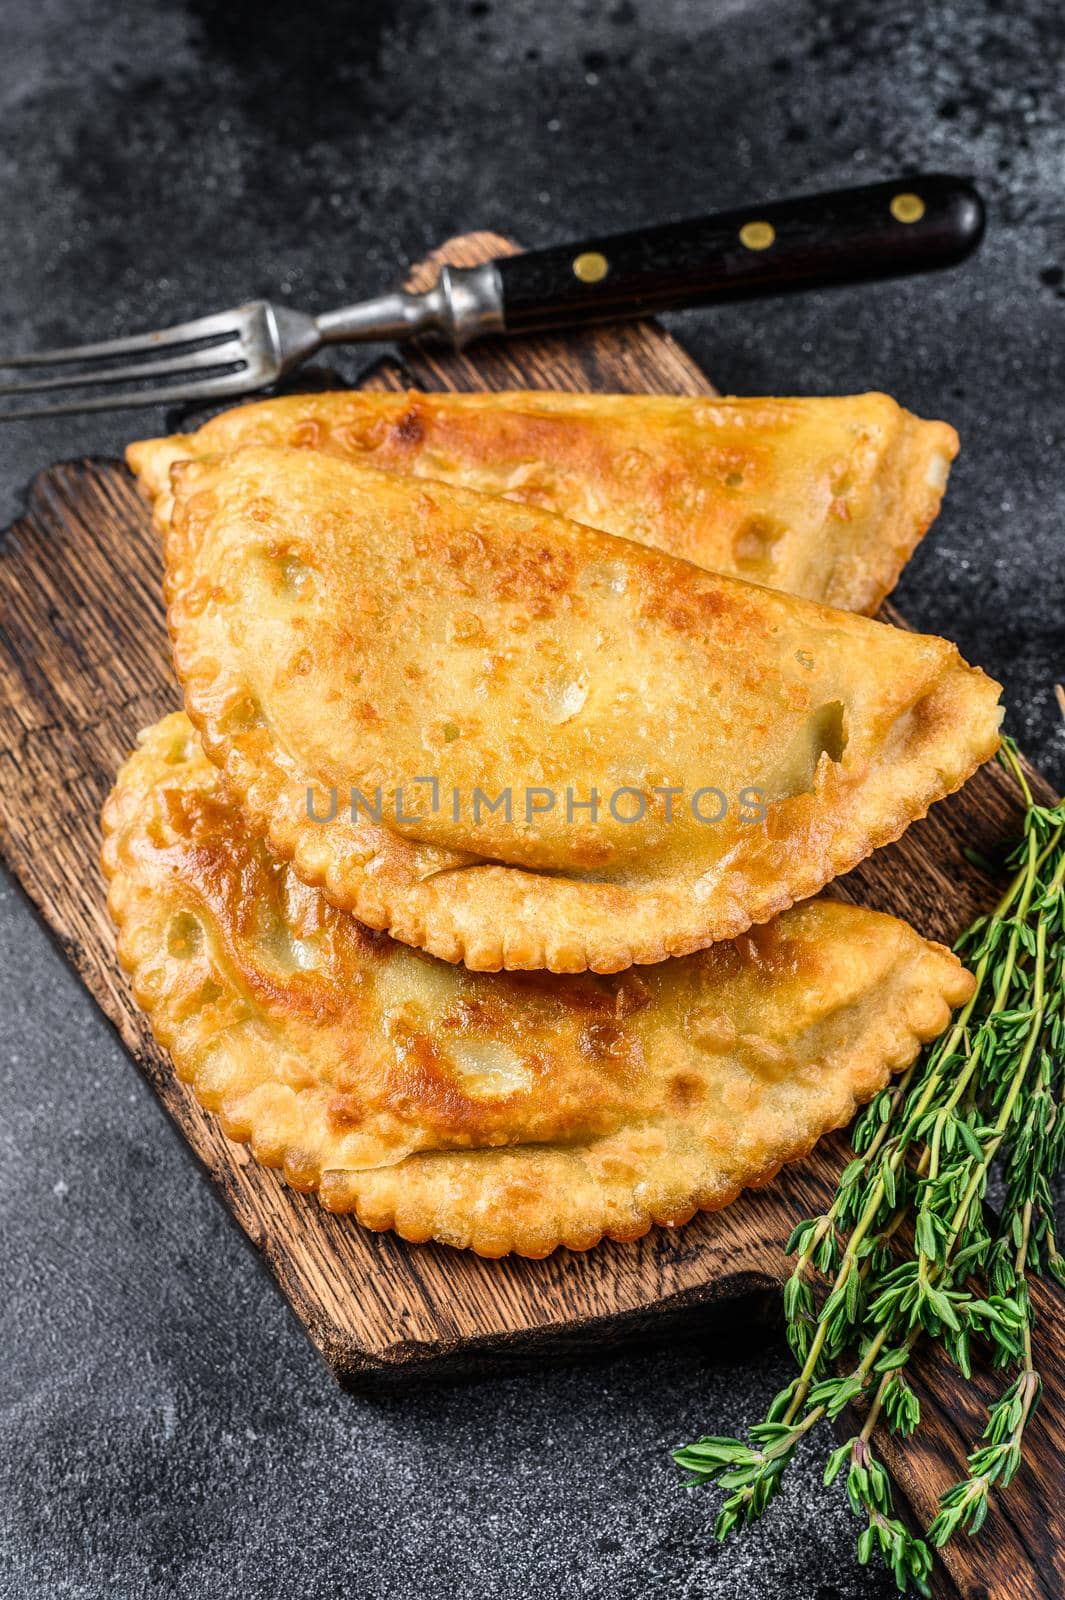 Fried in oil chebureks with meat and herbs, traditional Caucasian cuisine. Black background. Top view by Composter